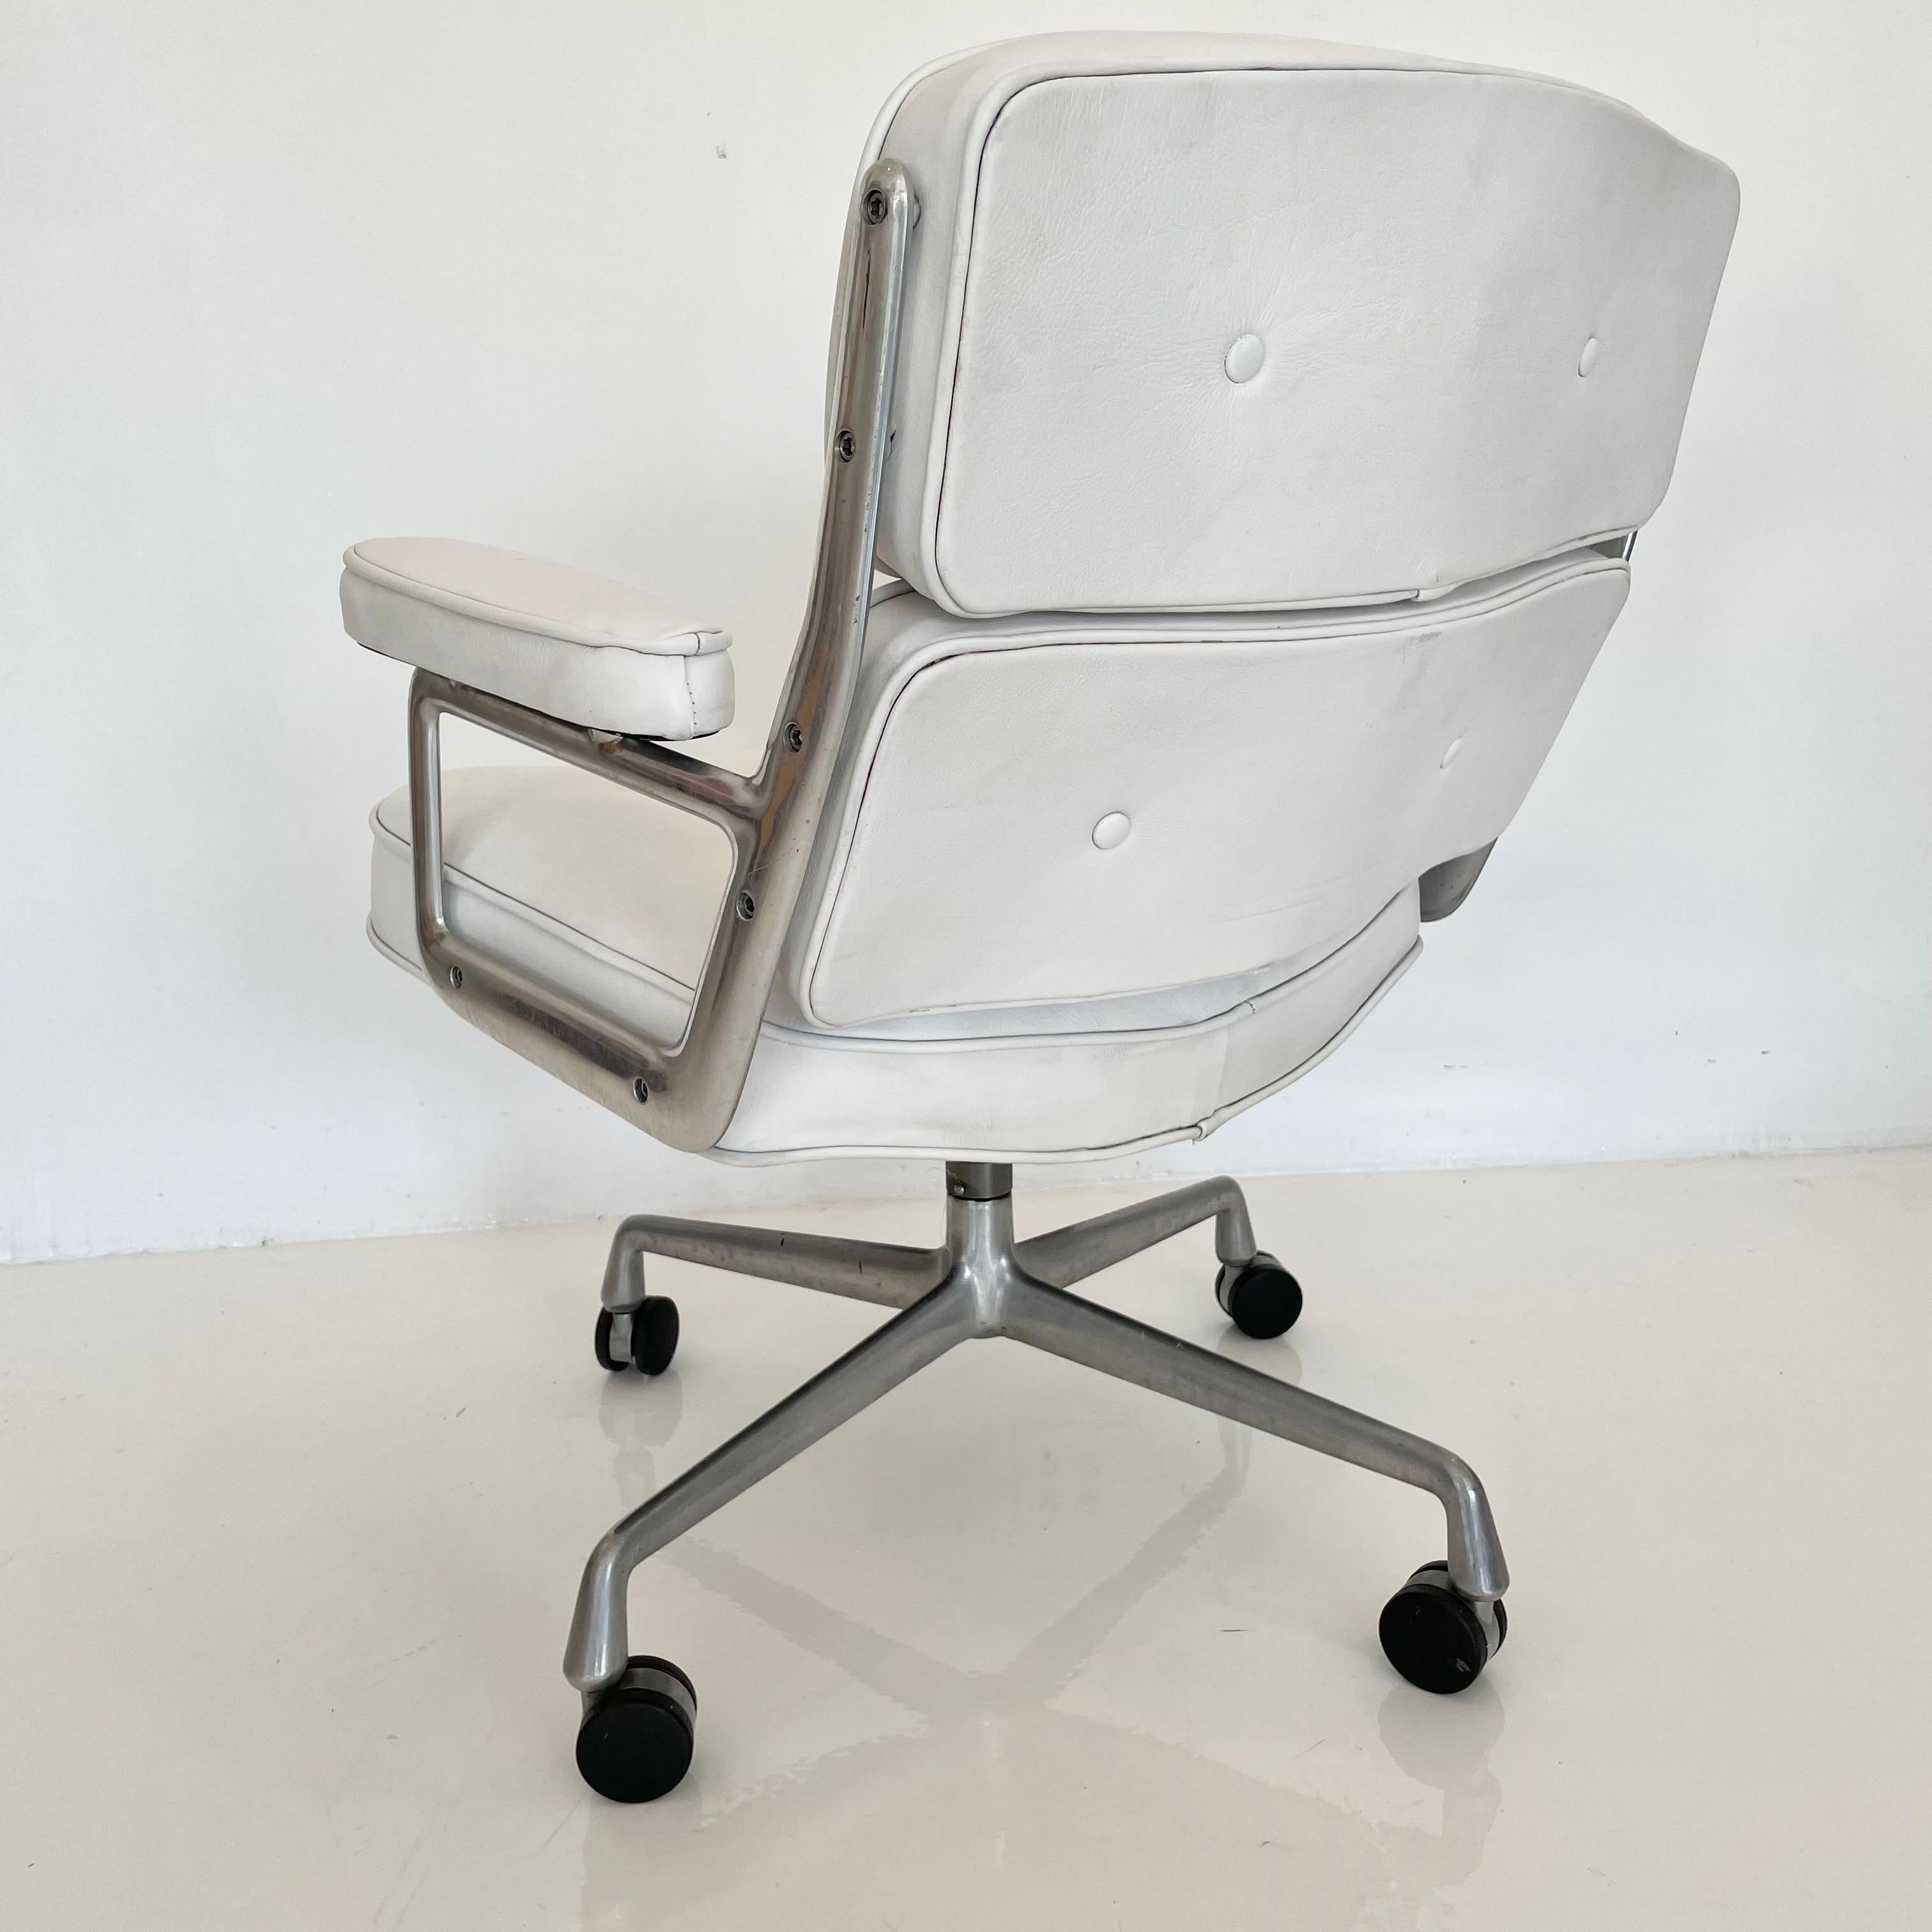 Late 20th Century Original Eames Time Life Chair in White Leather